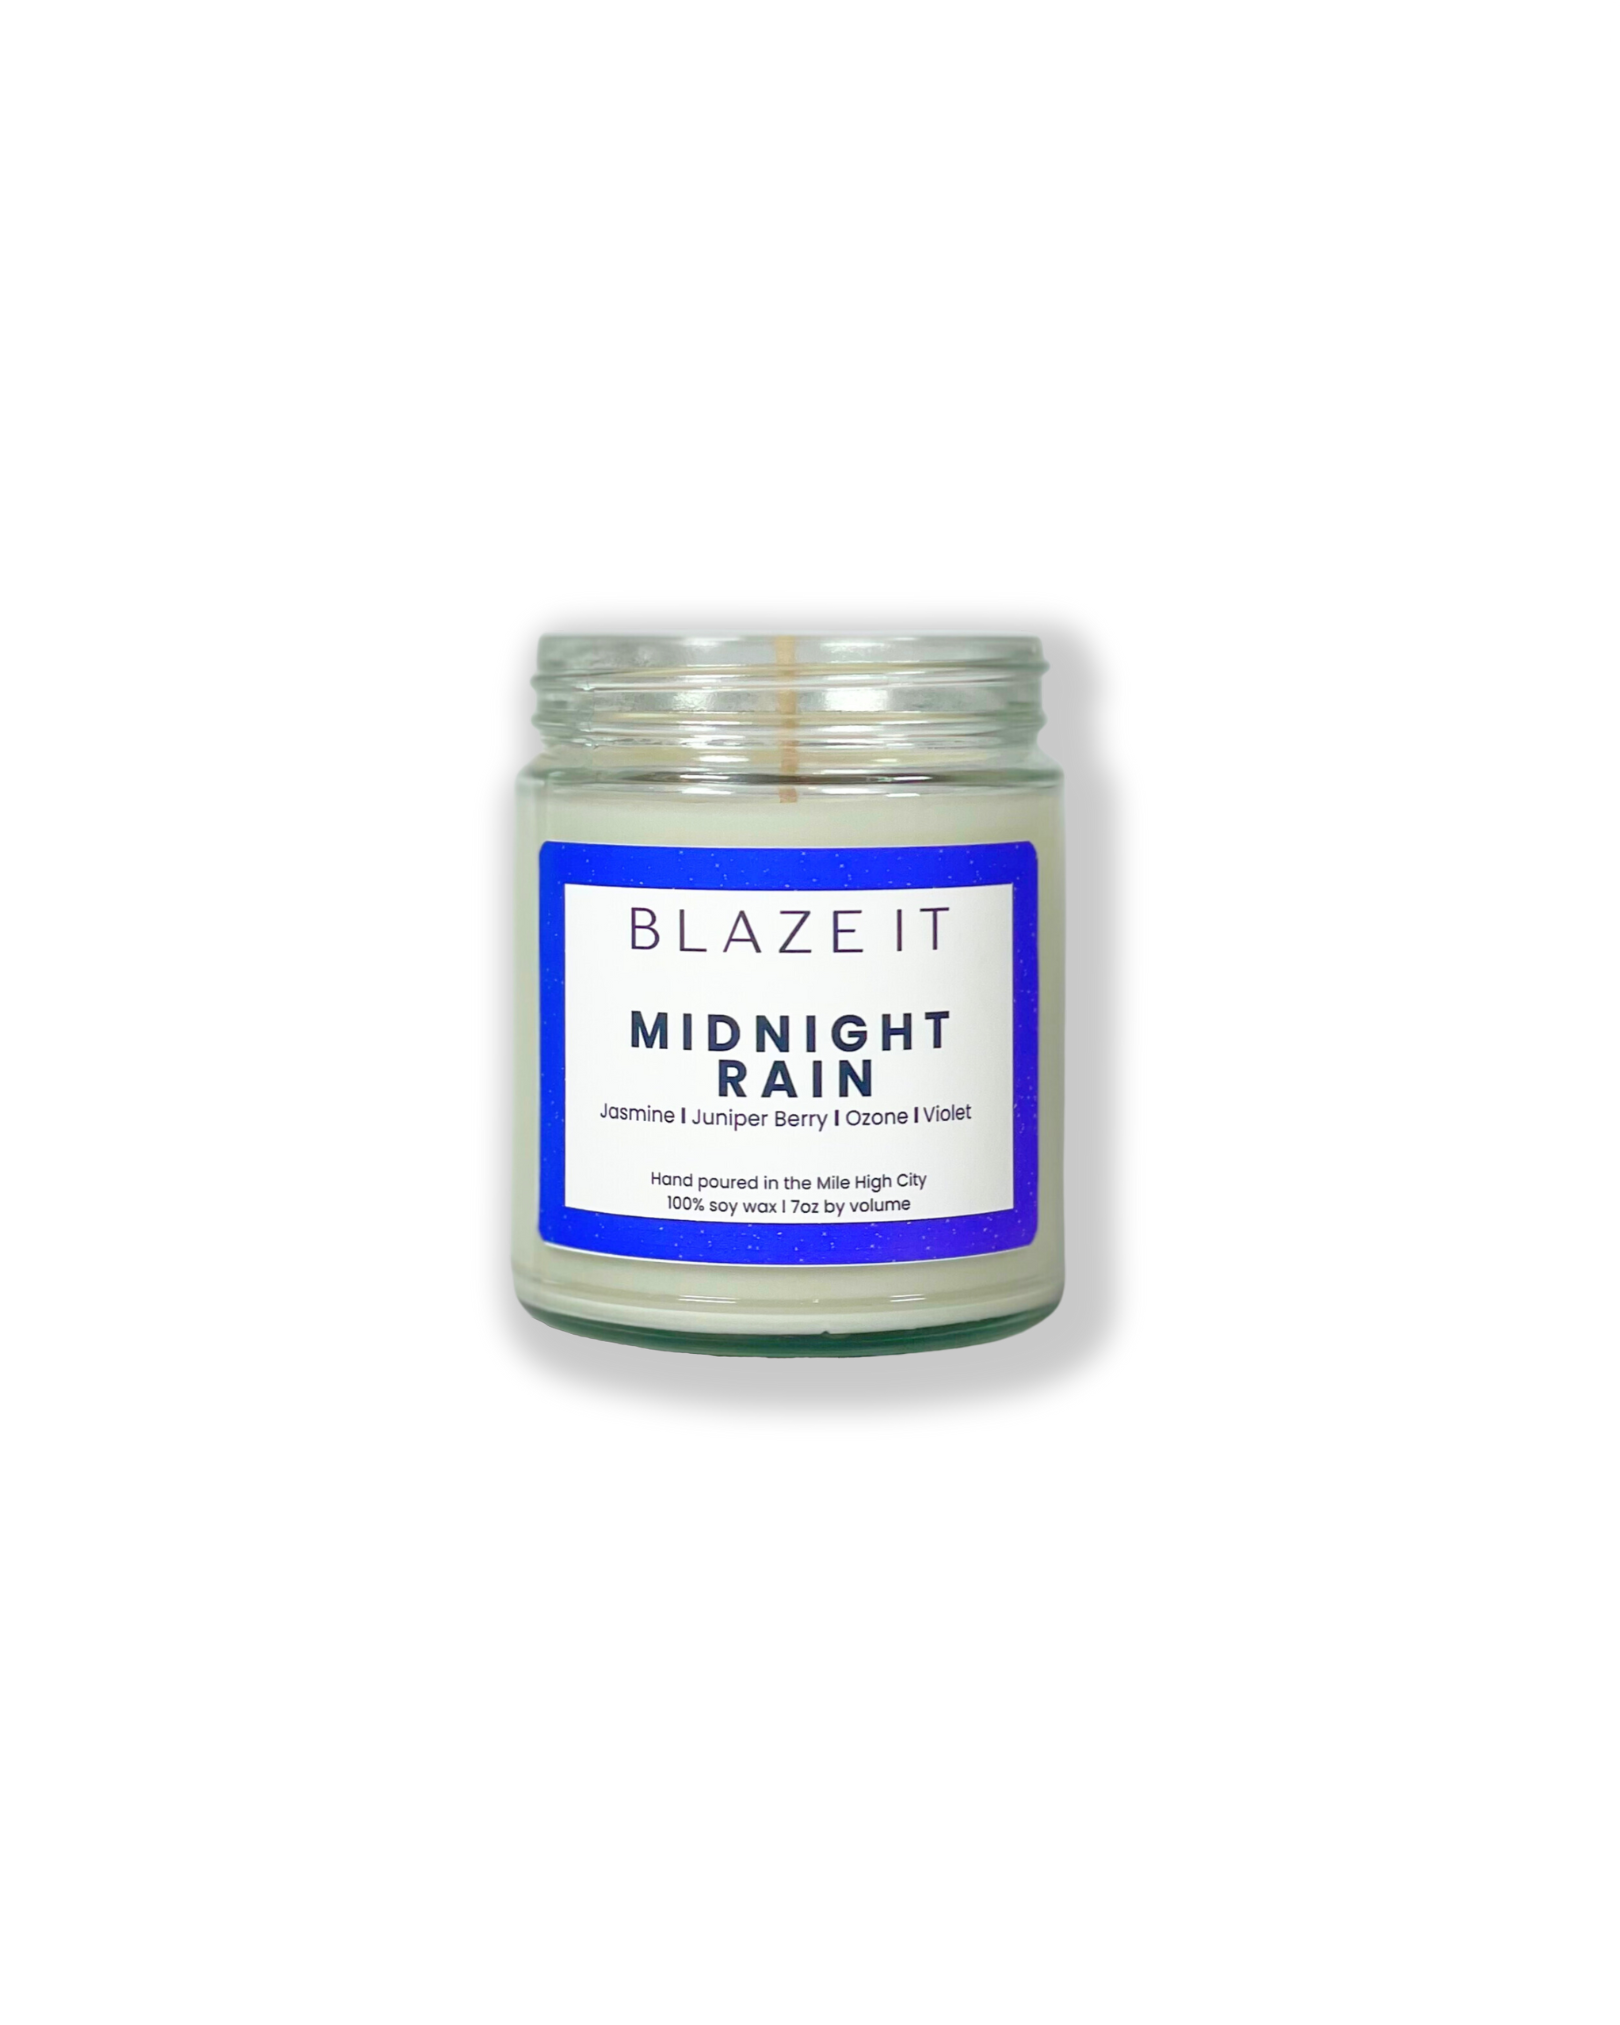 Midnight Rain soy candle - Blaze It Candle Co